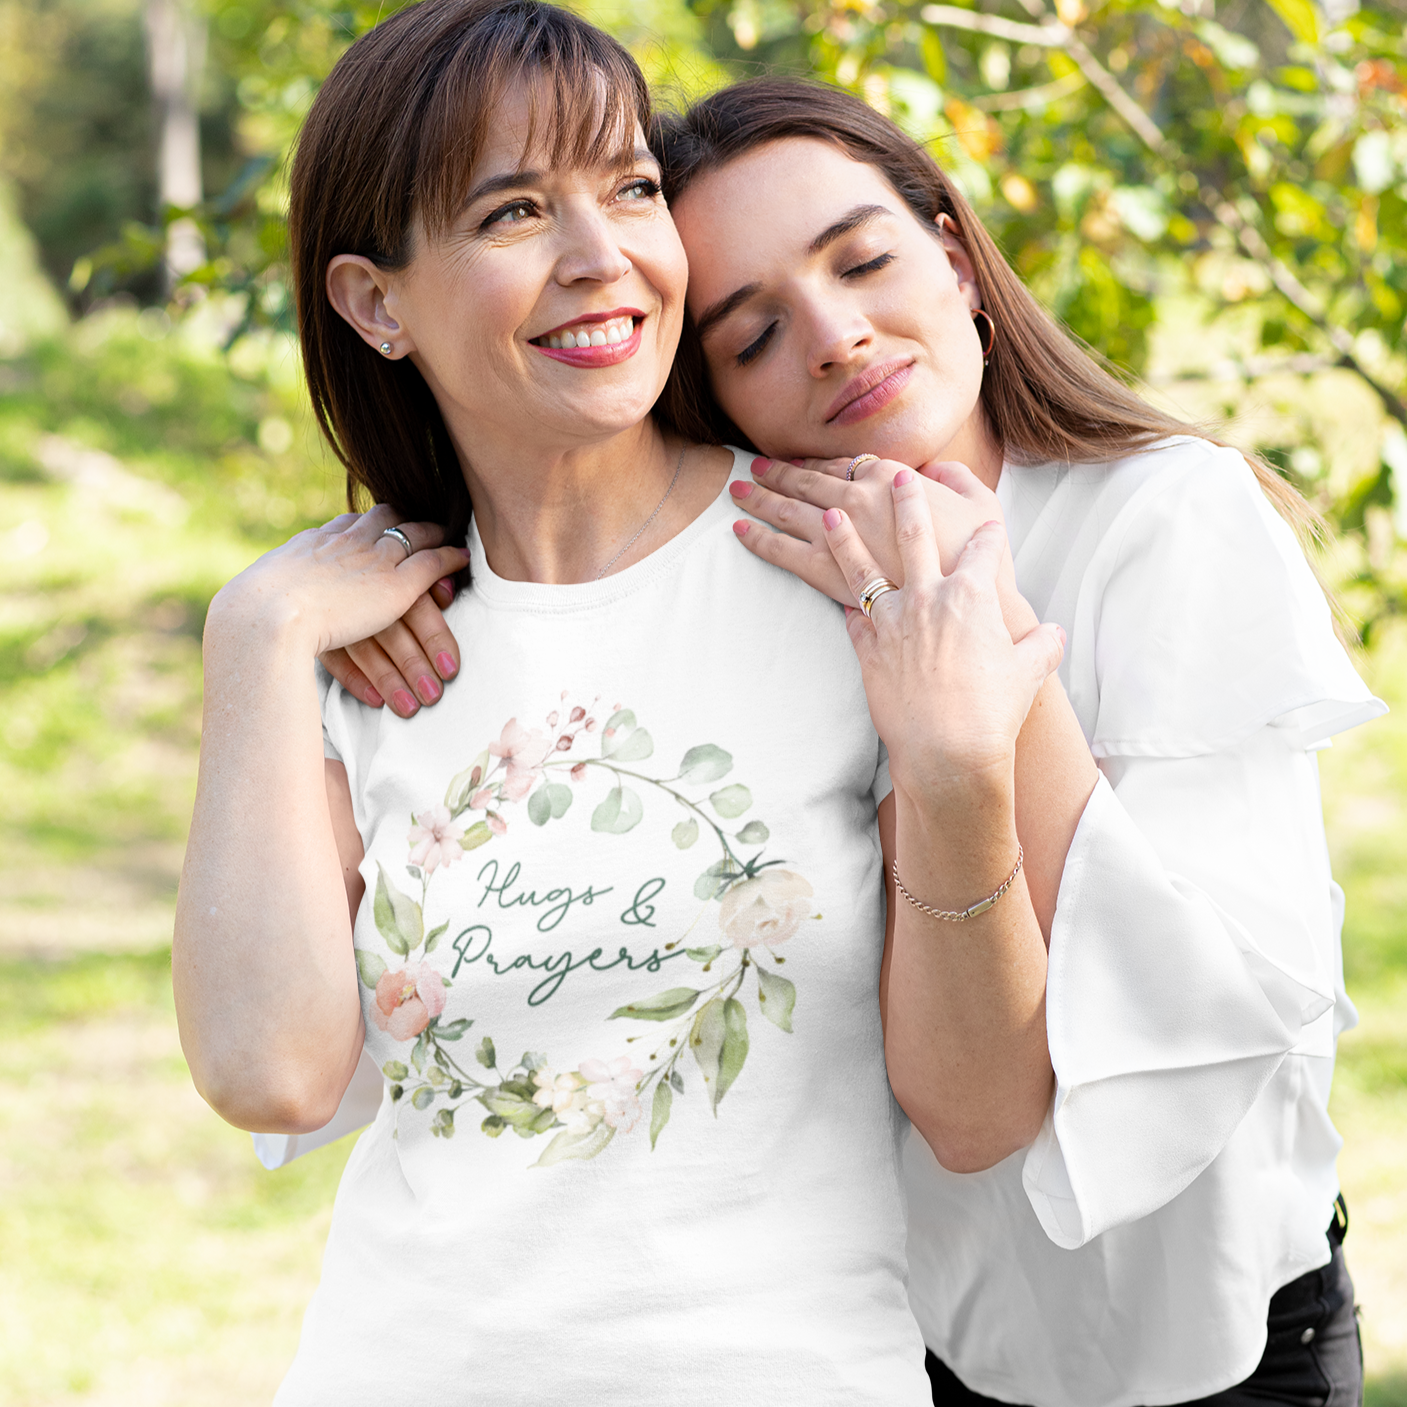 Smiling woman wearing a Hugs and Prayers Tshirt receiving a hug from her daughter.